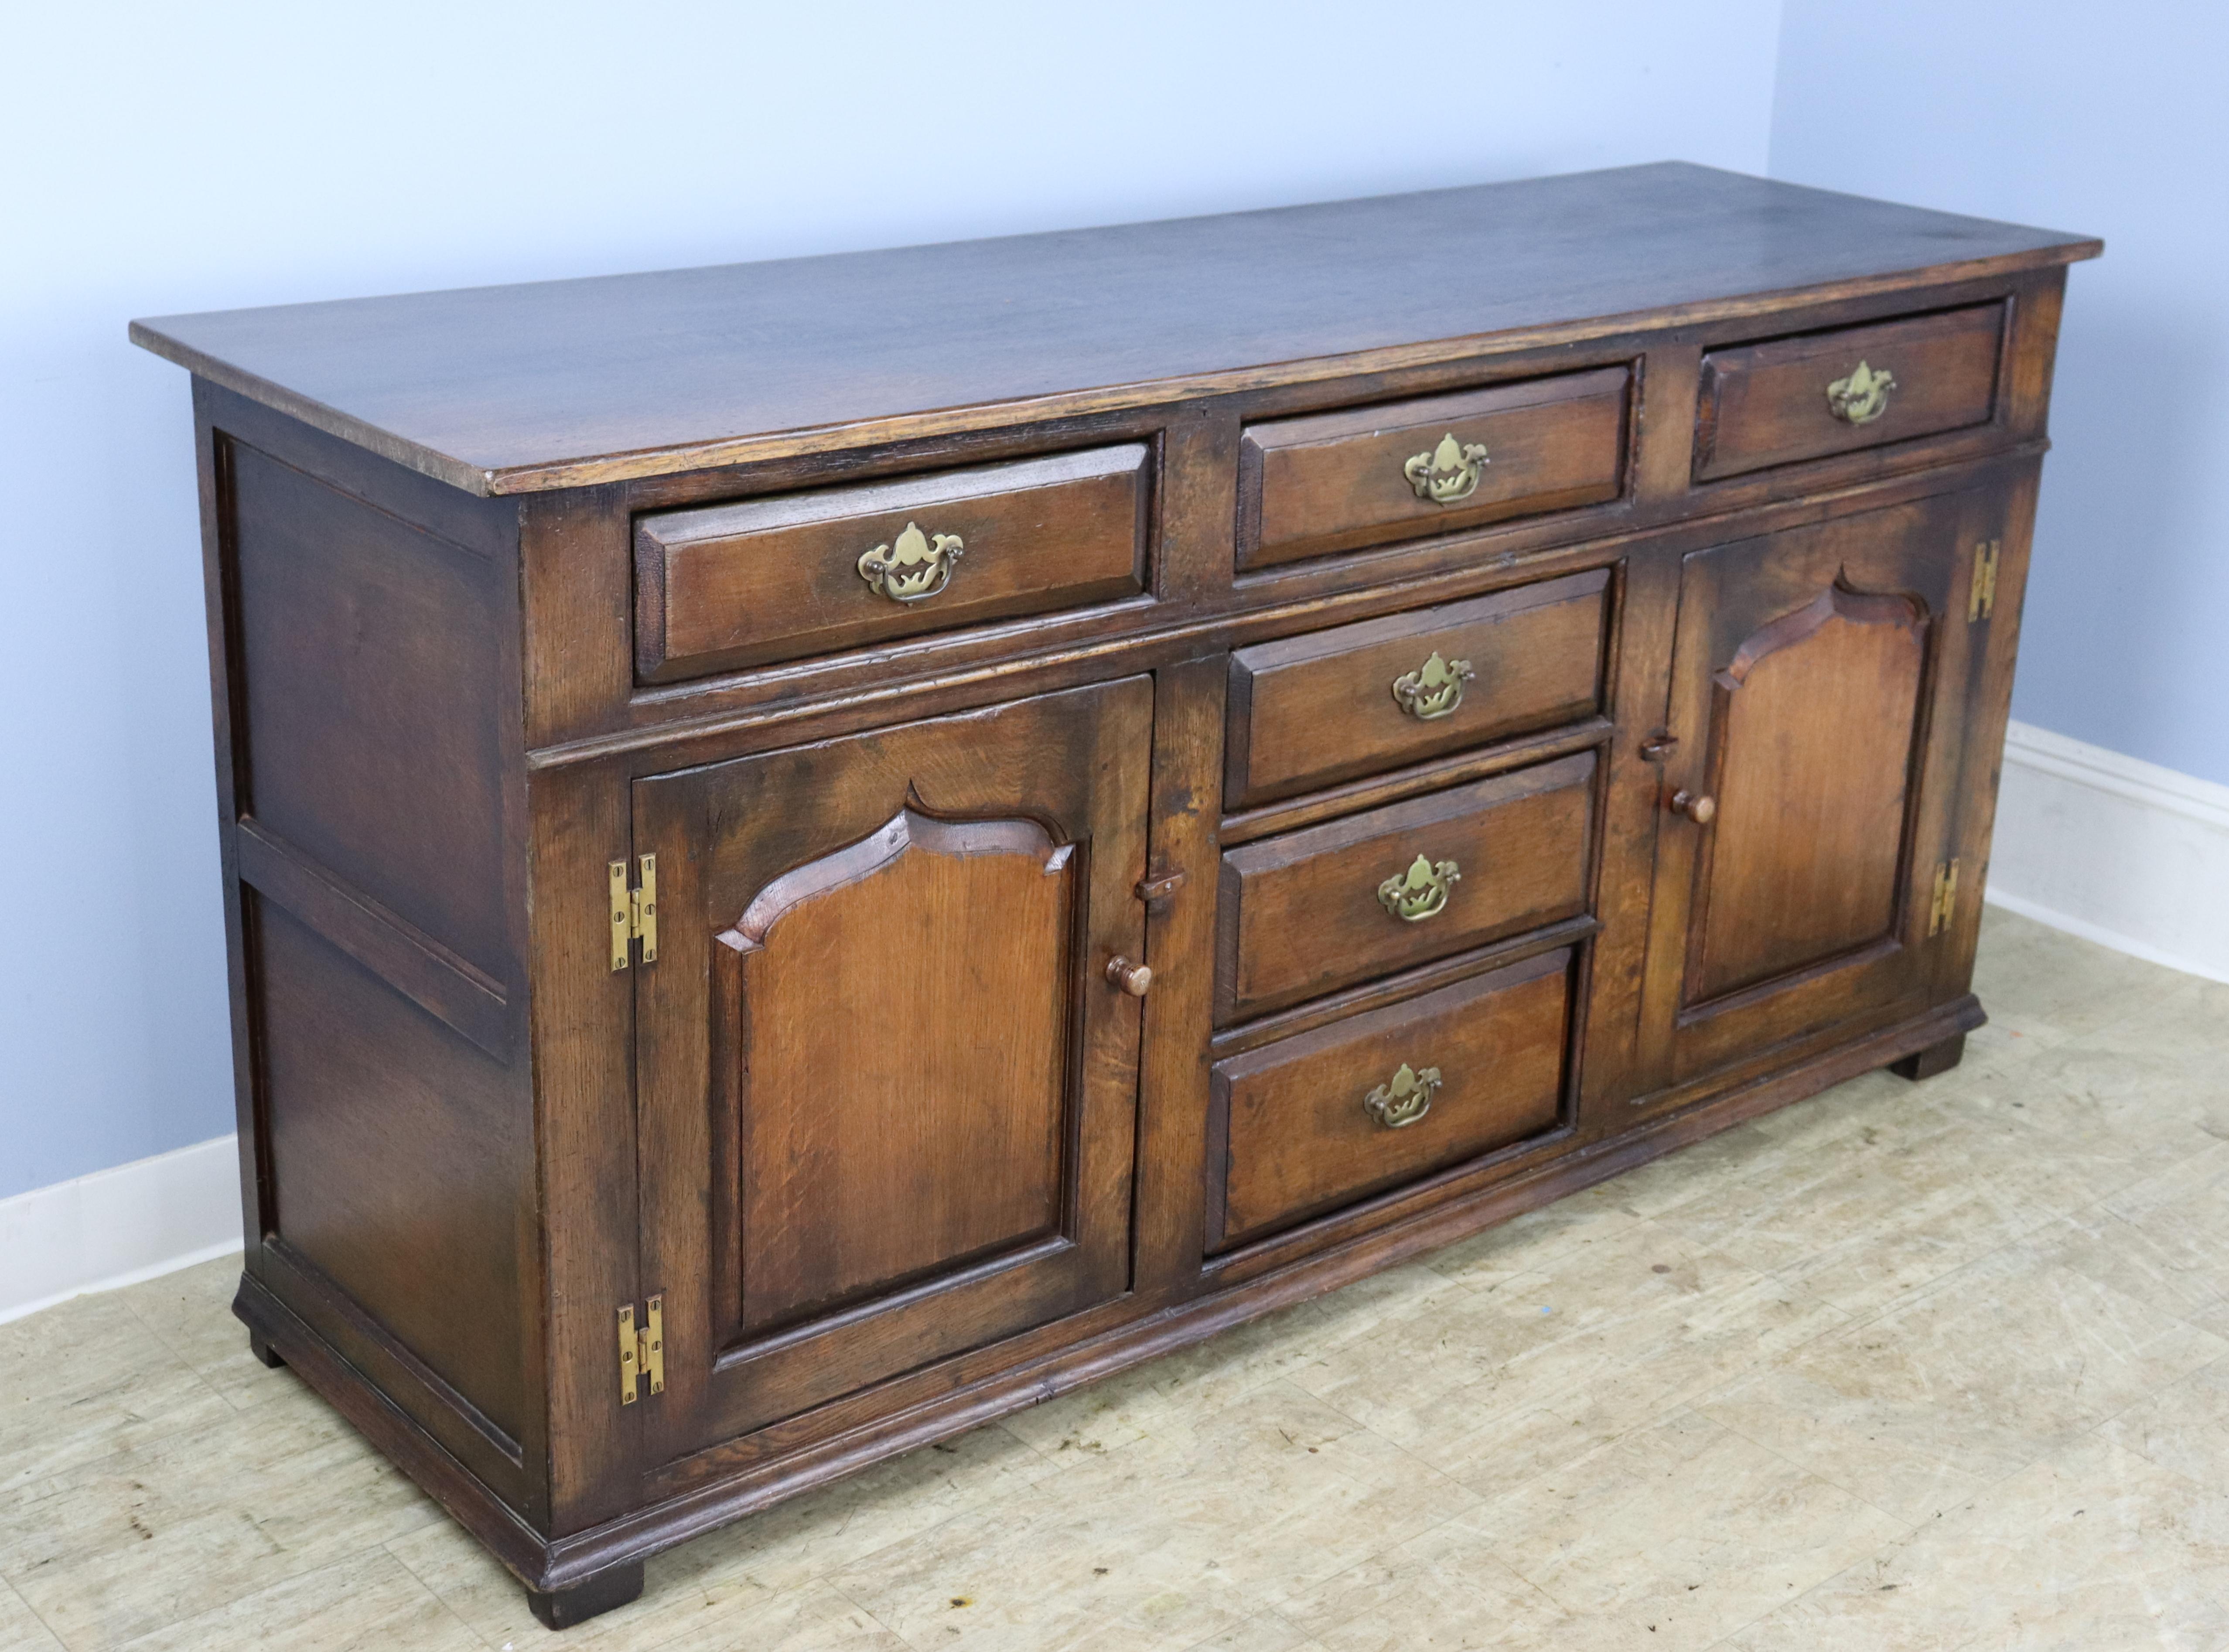 An elegant dark oak dresser base with lots of excellent storage. The six roomy drawers are clean and slide easily. The outset panels on the drawers and doors, as well as the top, have good oak grain and patina.